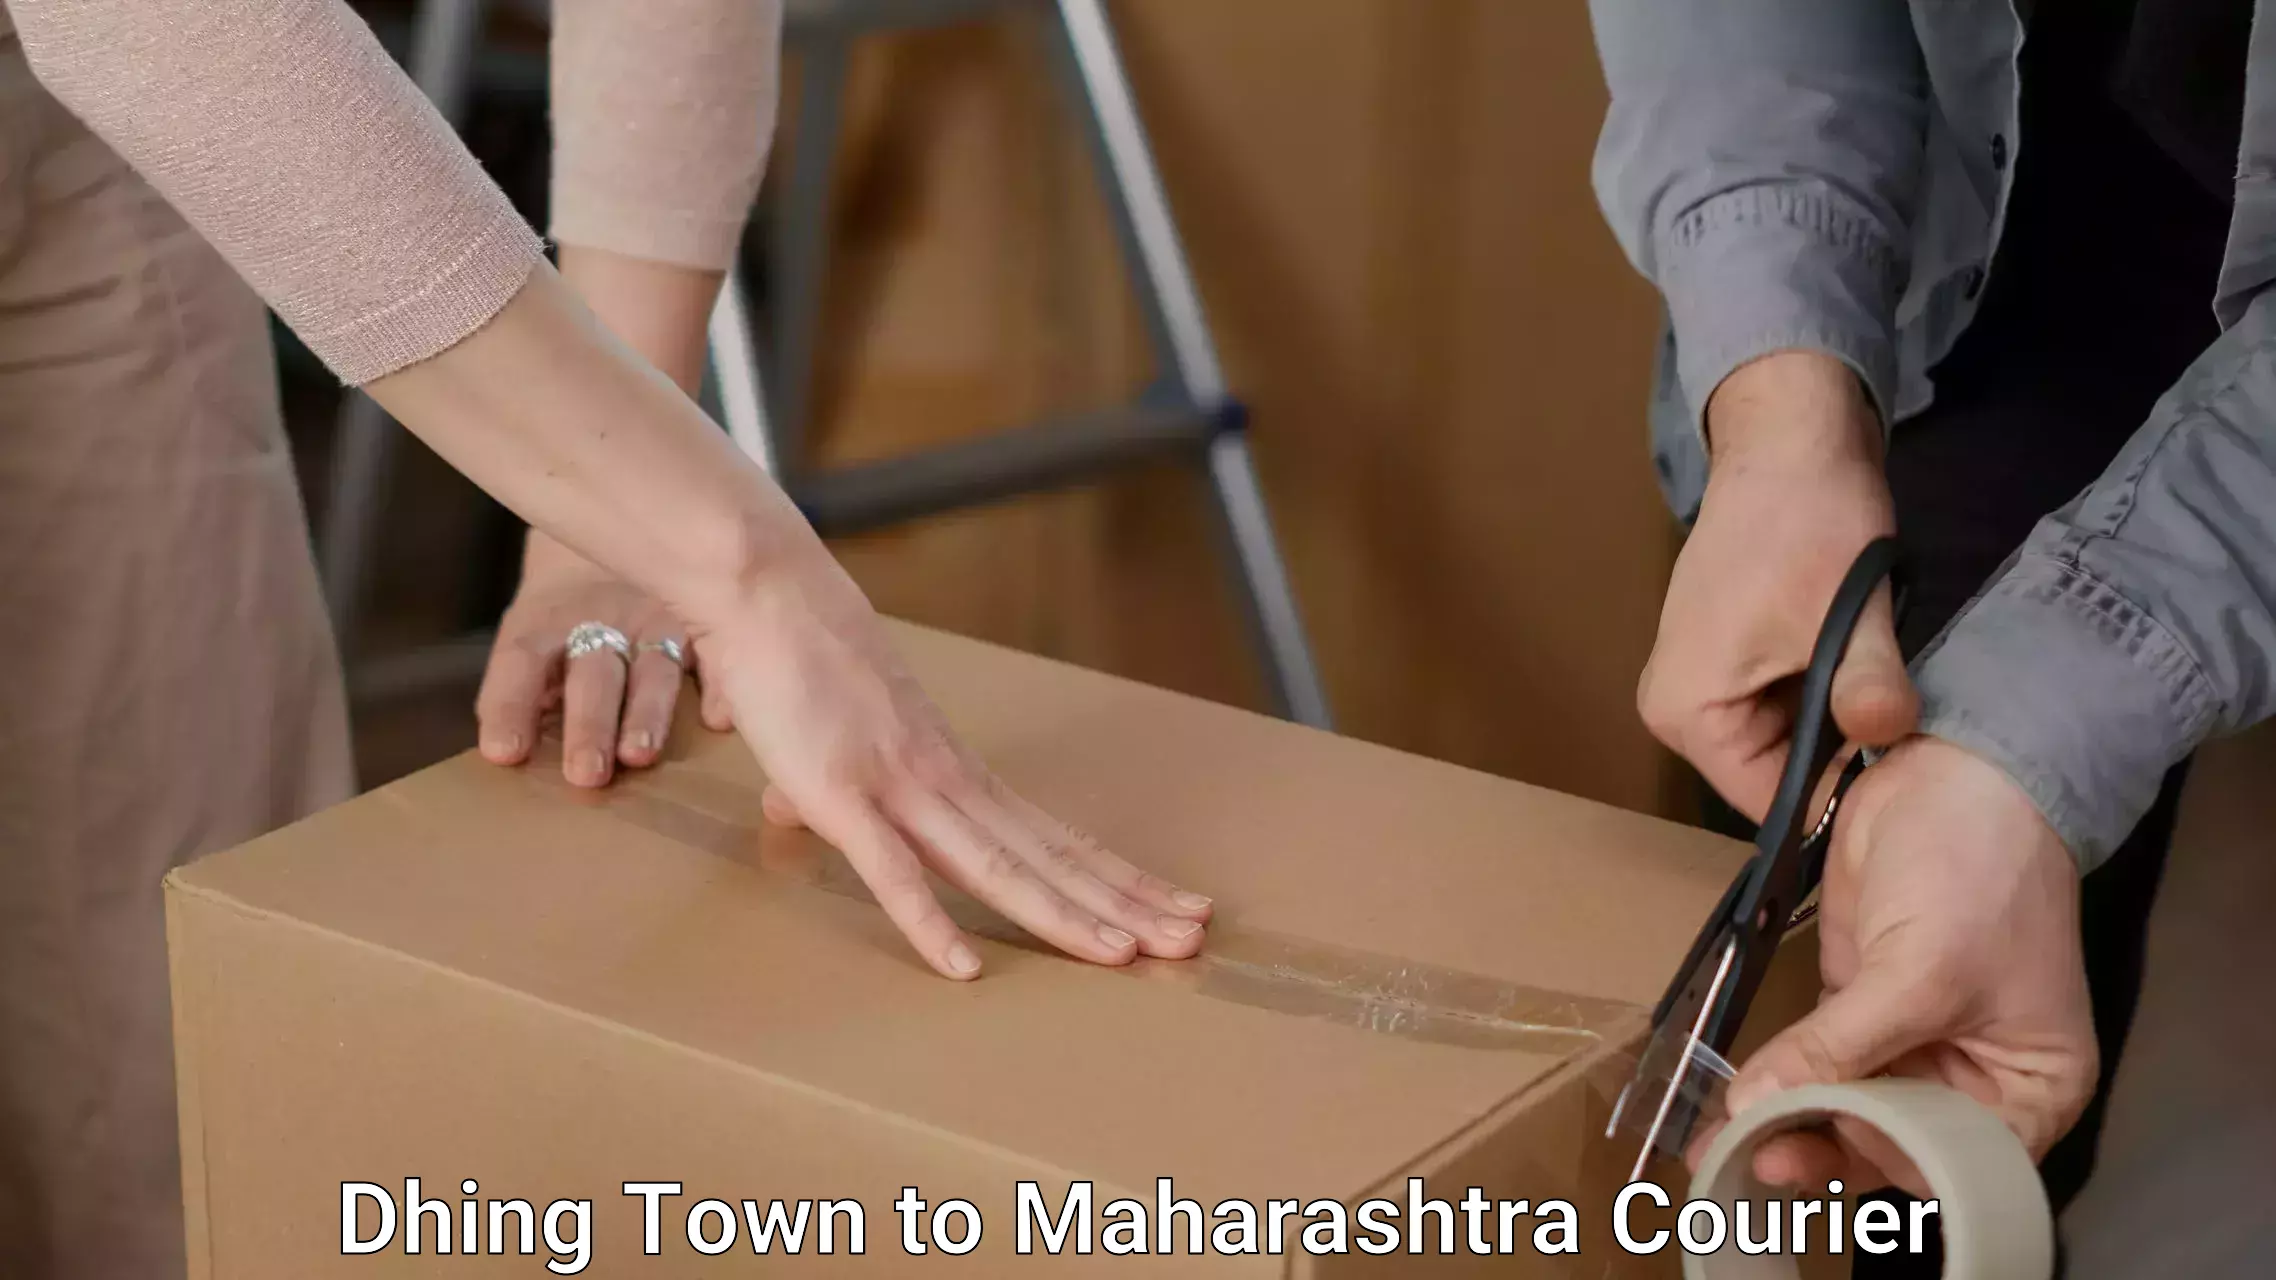 Furniture shipping services Dhing Town to Solapur